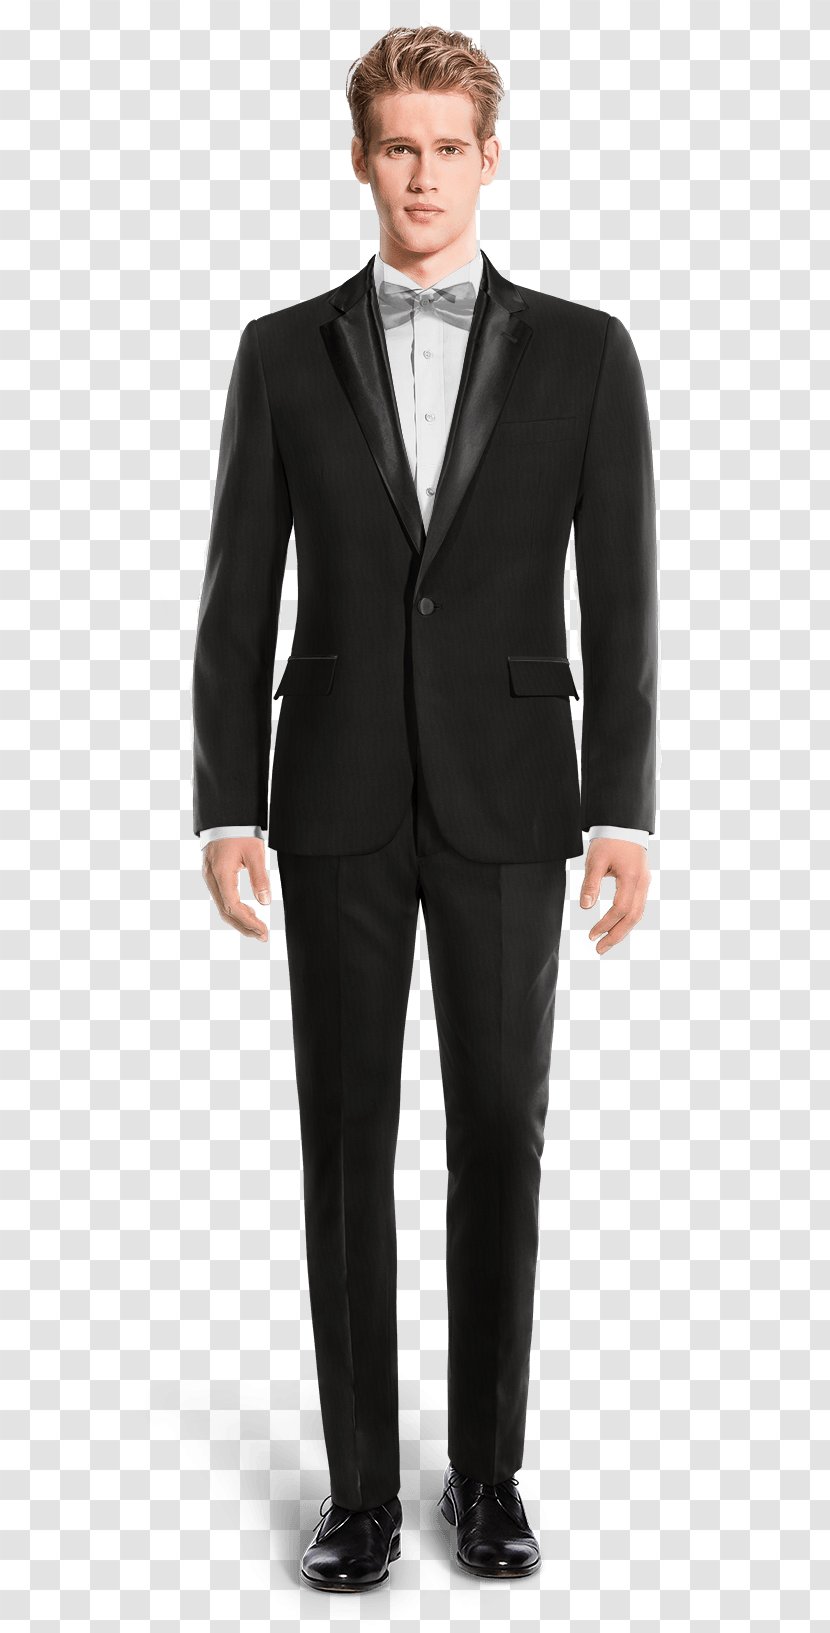 Suit Double-breasted Tuxedo Tailcoat - White Collar Worker Transparent PNG